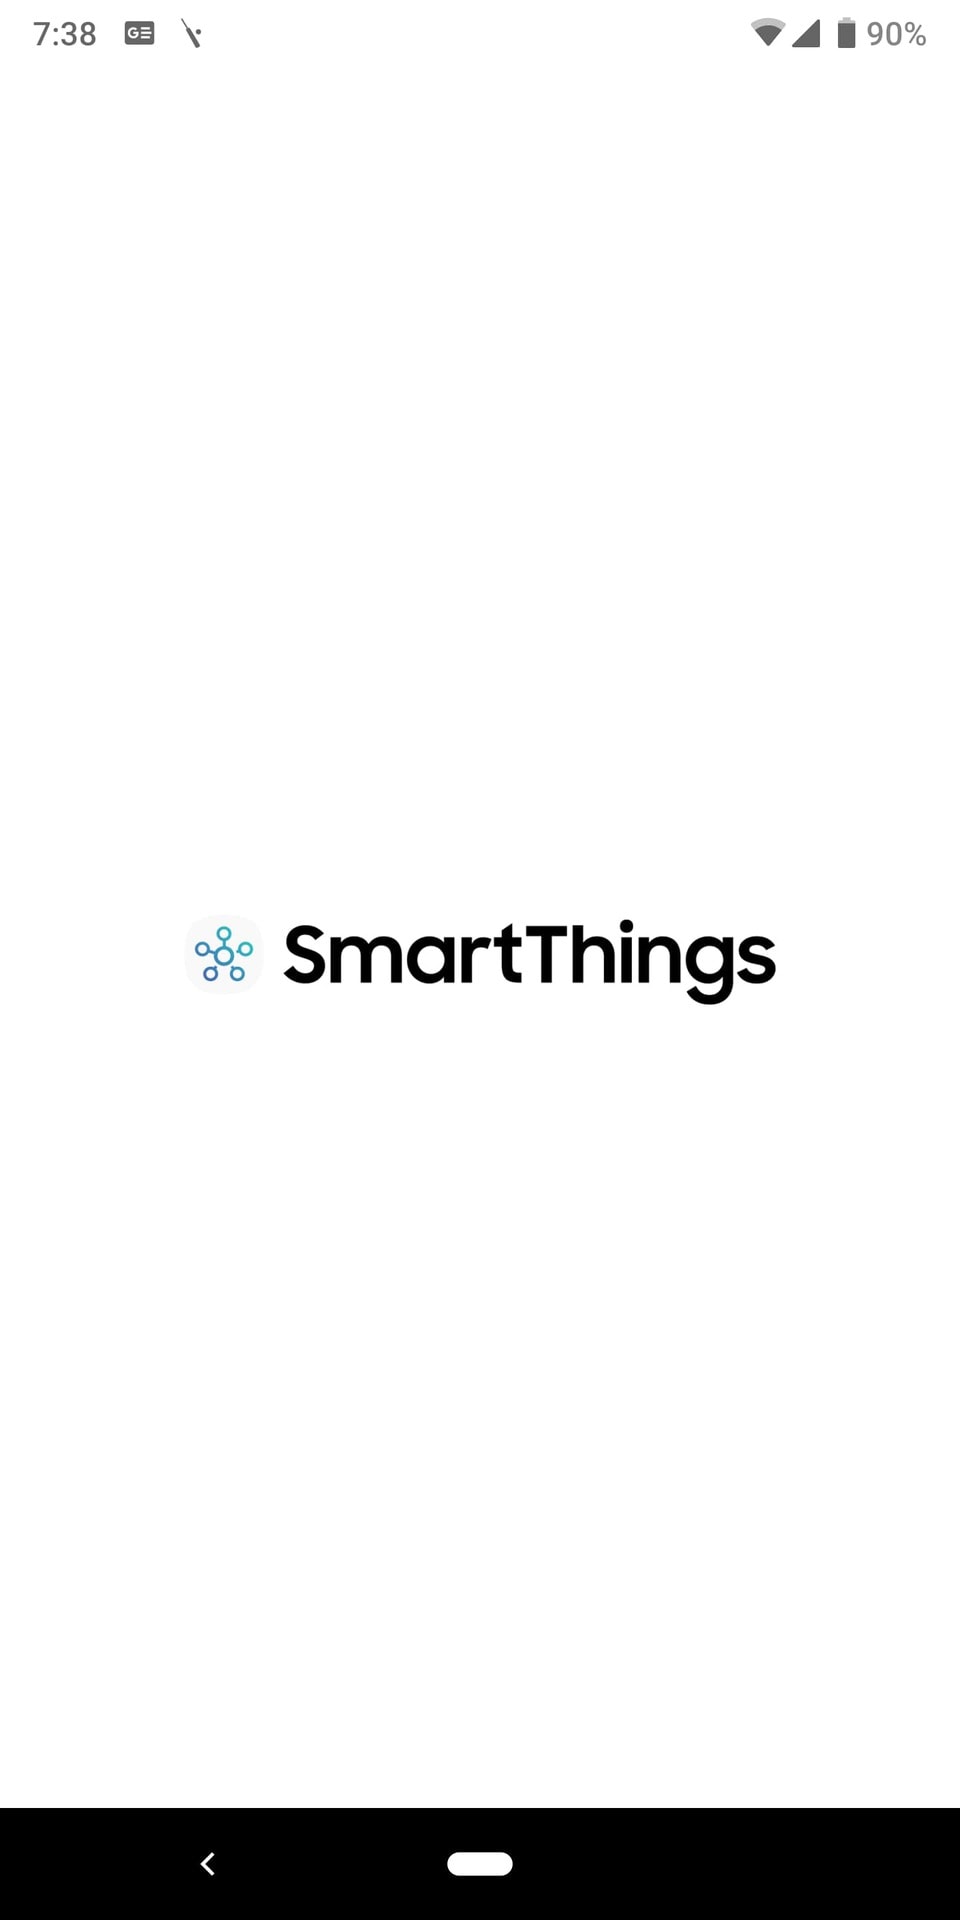 samsung smartthings app welcome page